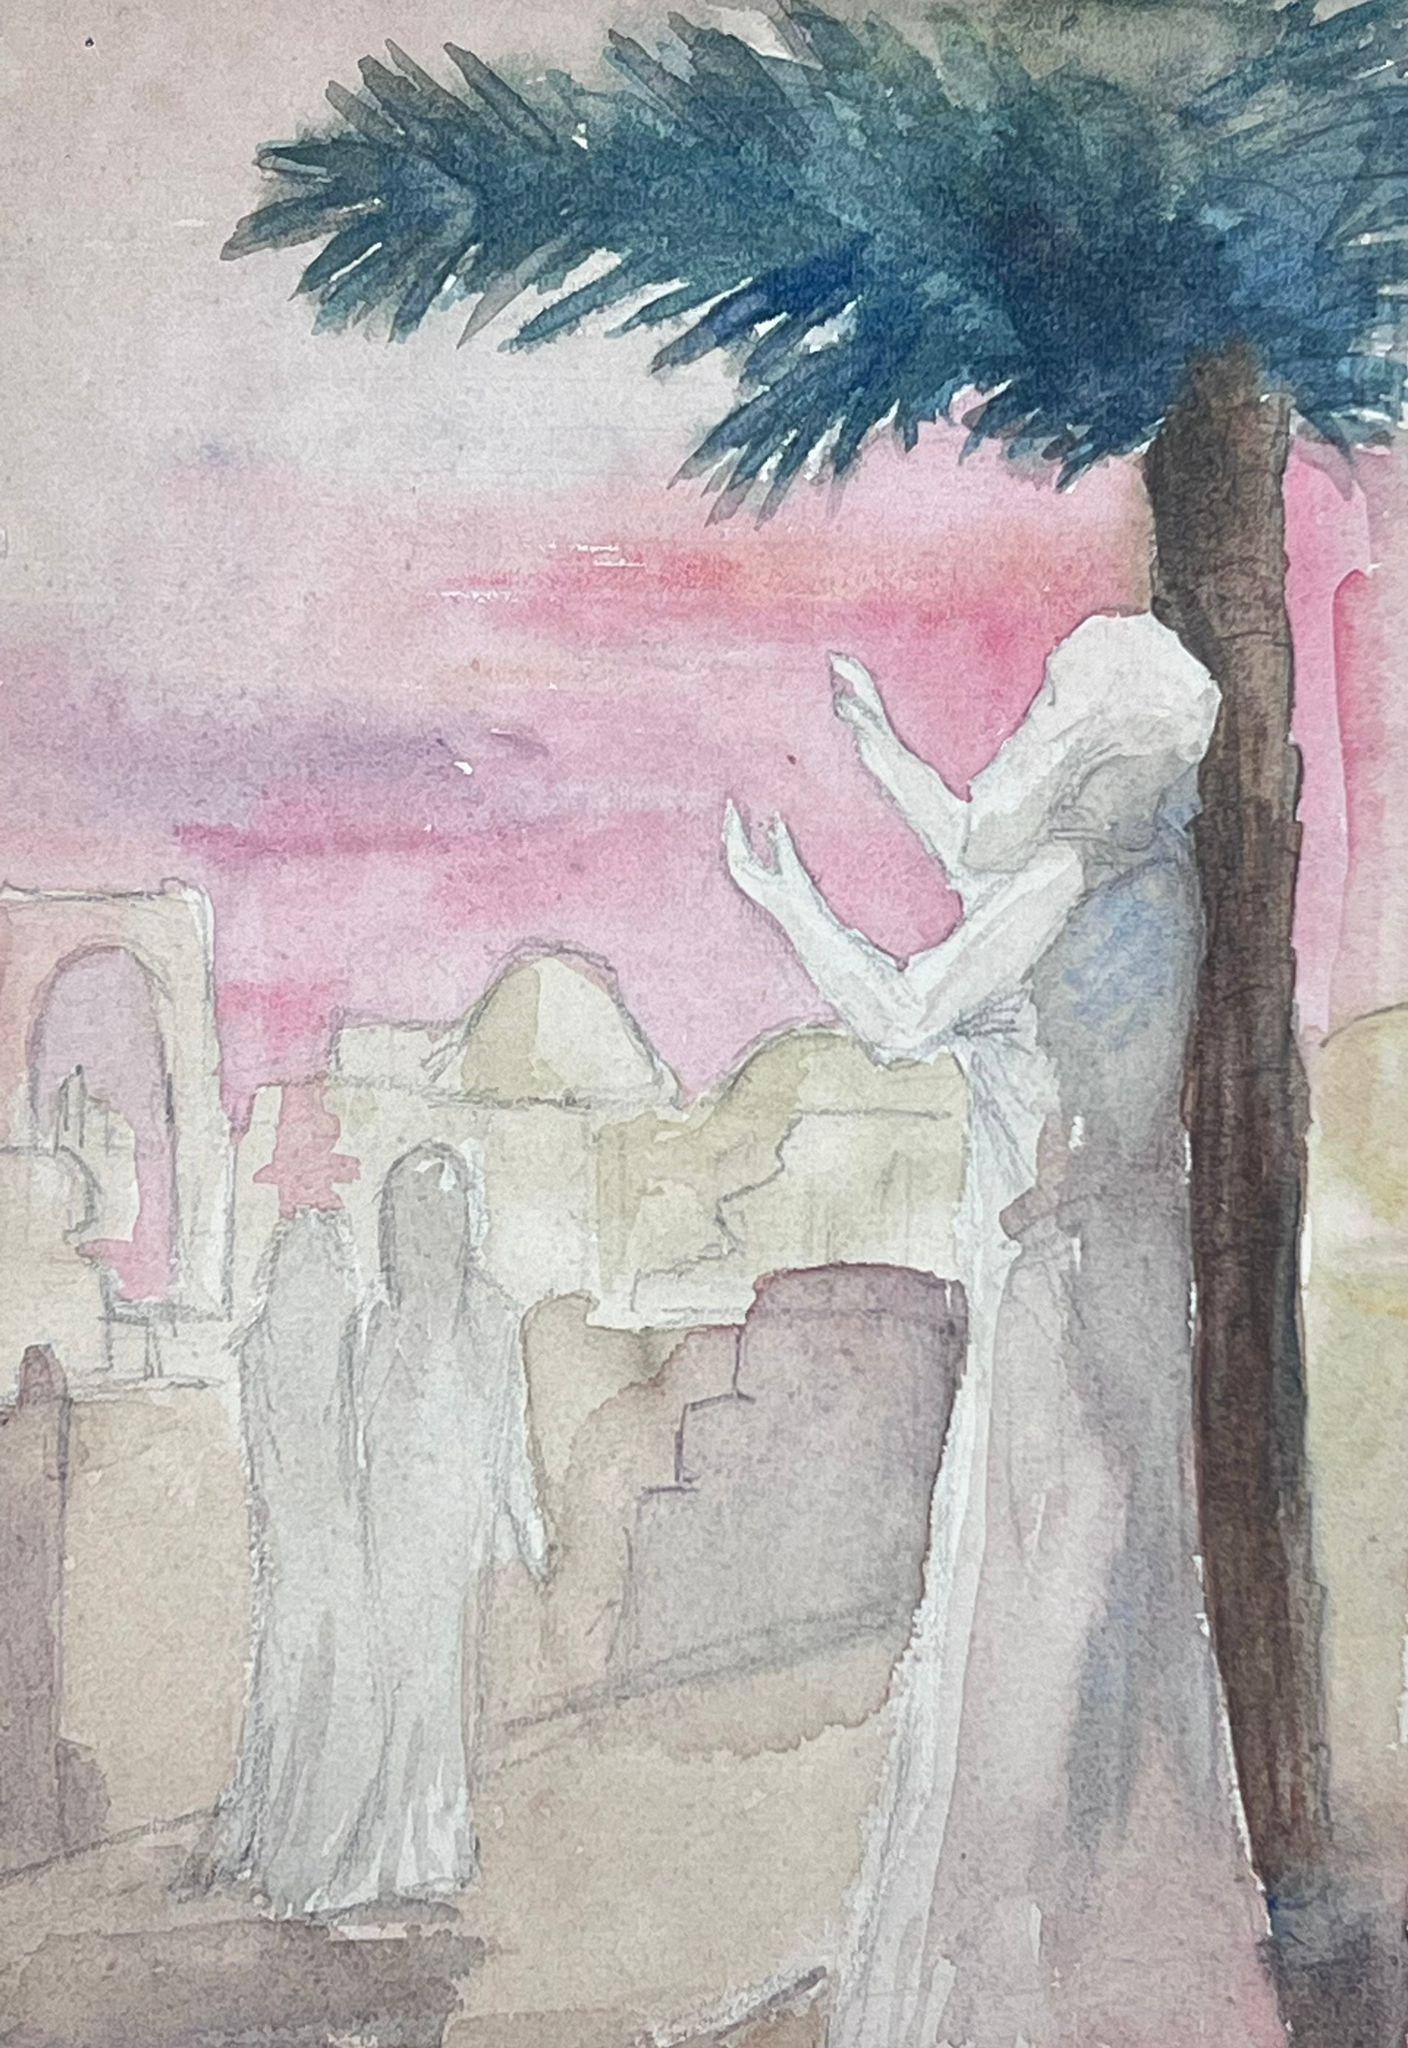 French Landscape
signed by Louise Alix (French, 1888-1980) *see notes below
provenance stamp to the back 
watercolour painting on artist paper, unframed
measures: 9.75 high by 6 inches wide
condition: overall very good and sound, a few scuffs and